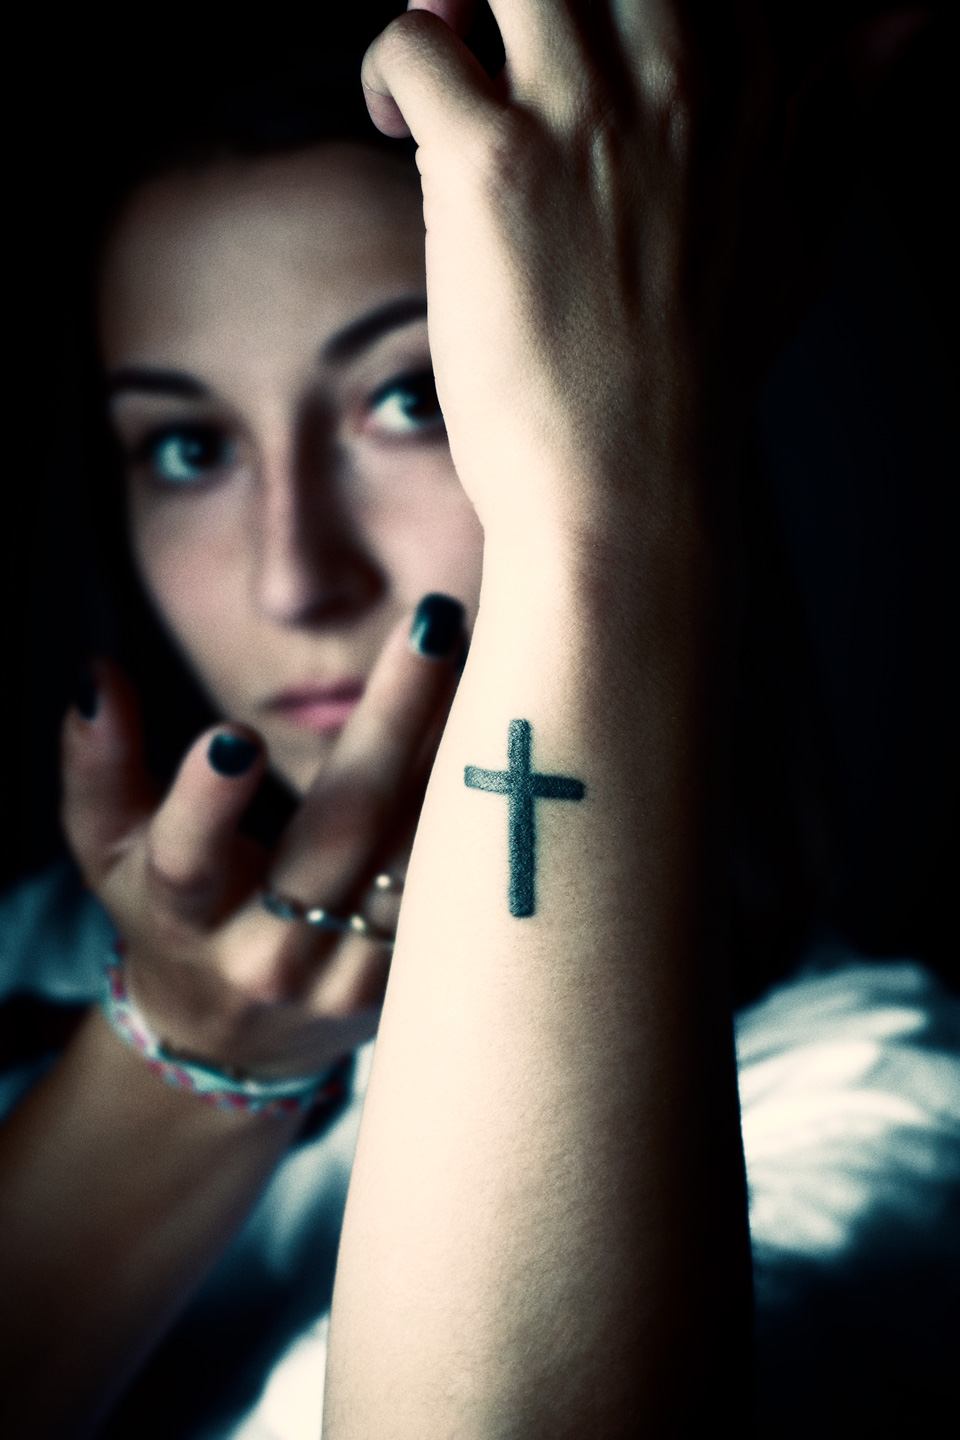 French Photographer Portrait Photography Gothic girl with a Cross Tattoo